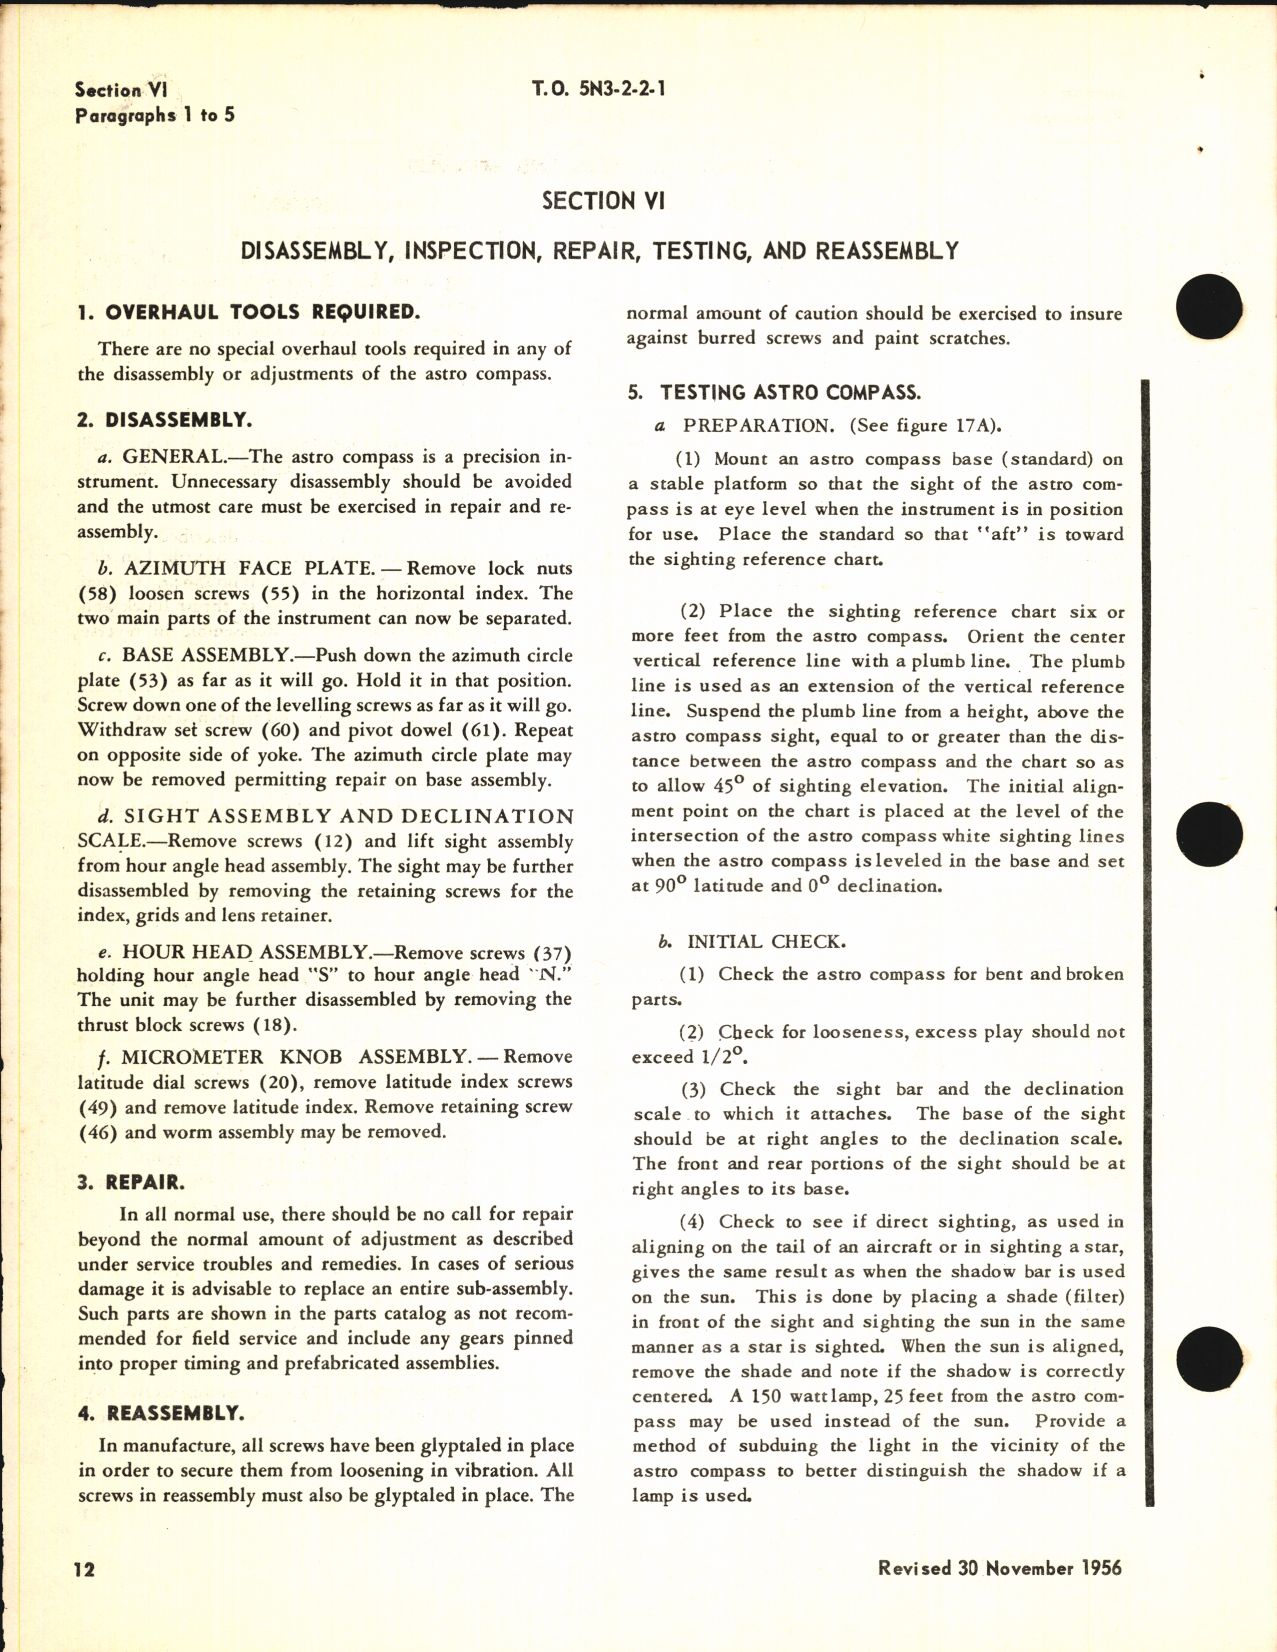 Sample page 6 from AirCorps Library document: Handbook of Instructions with Parts Catalog for Mark II Astro Compass